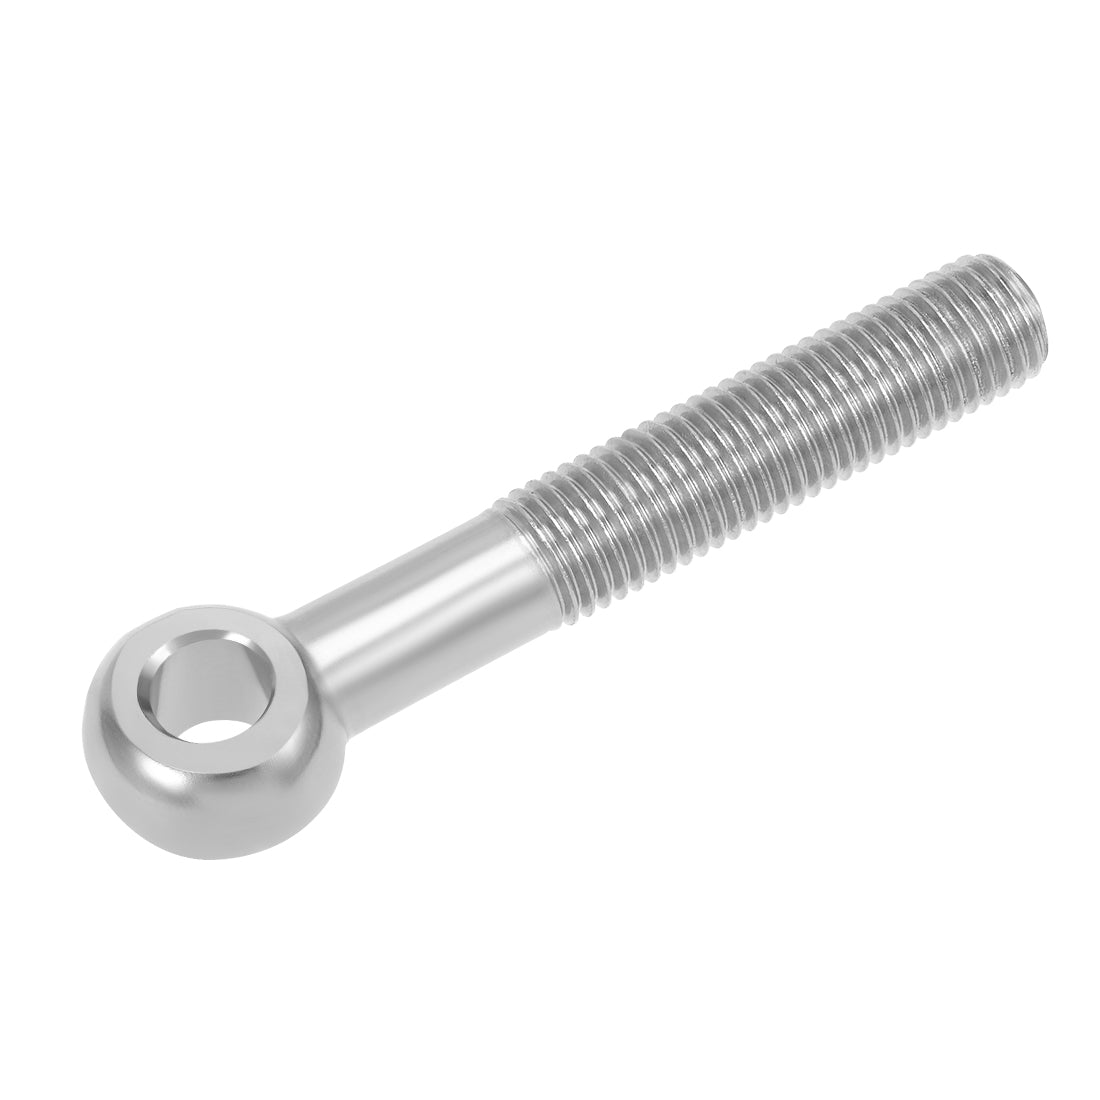 uxcell Uxcell M16 x 100mm Machinery Shoulder Swing Lifting Eye Bolt 304 Stainless Steel Metric Thread